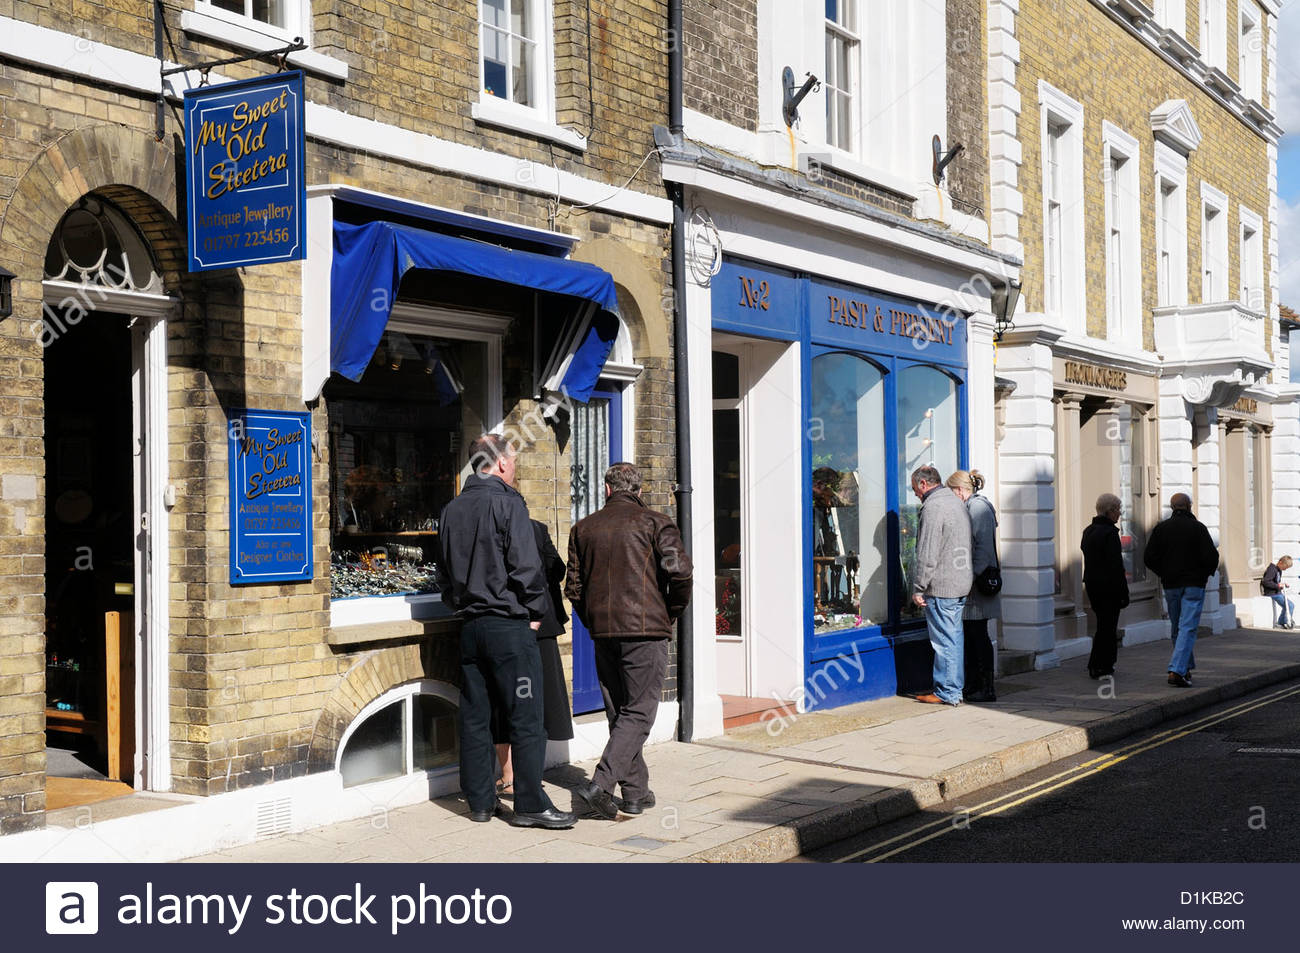  Shops  in the Highstreet Rye  East  Sussex  England  Stock 